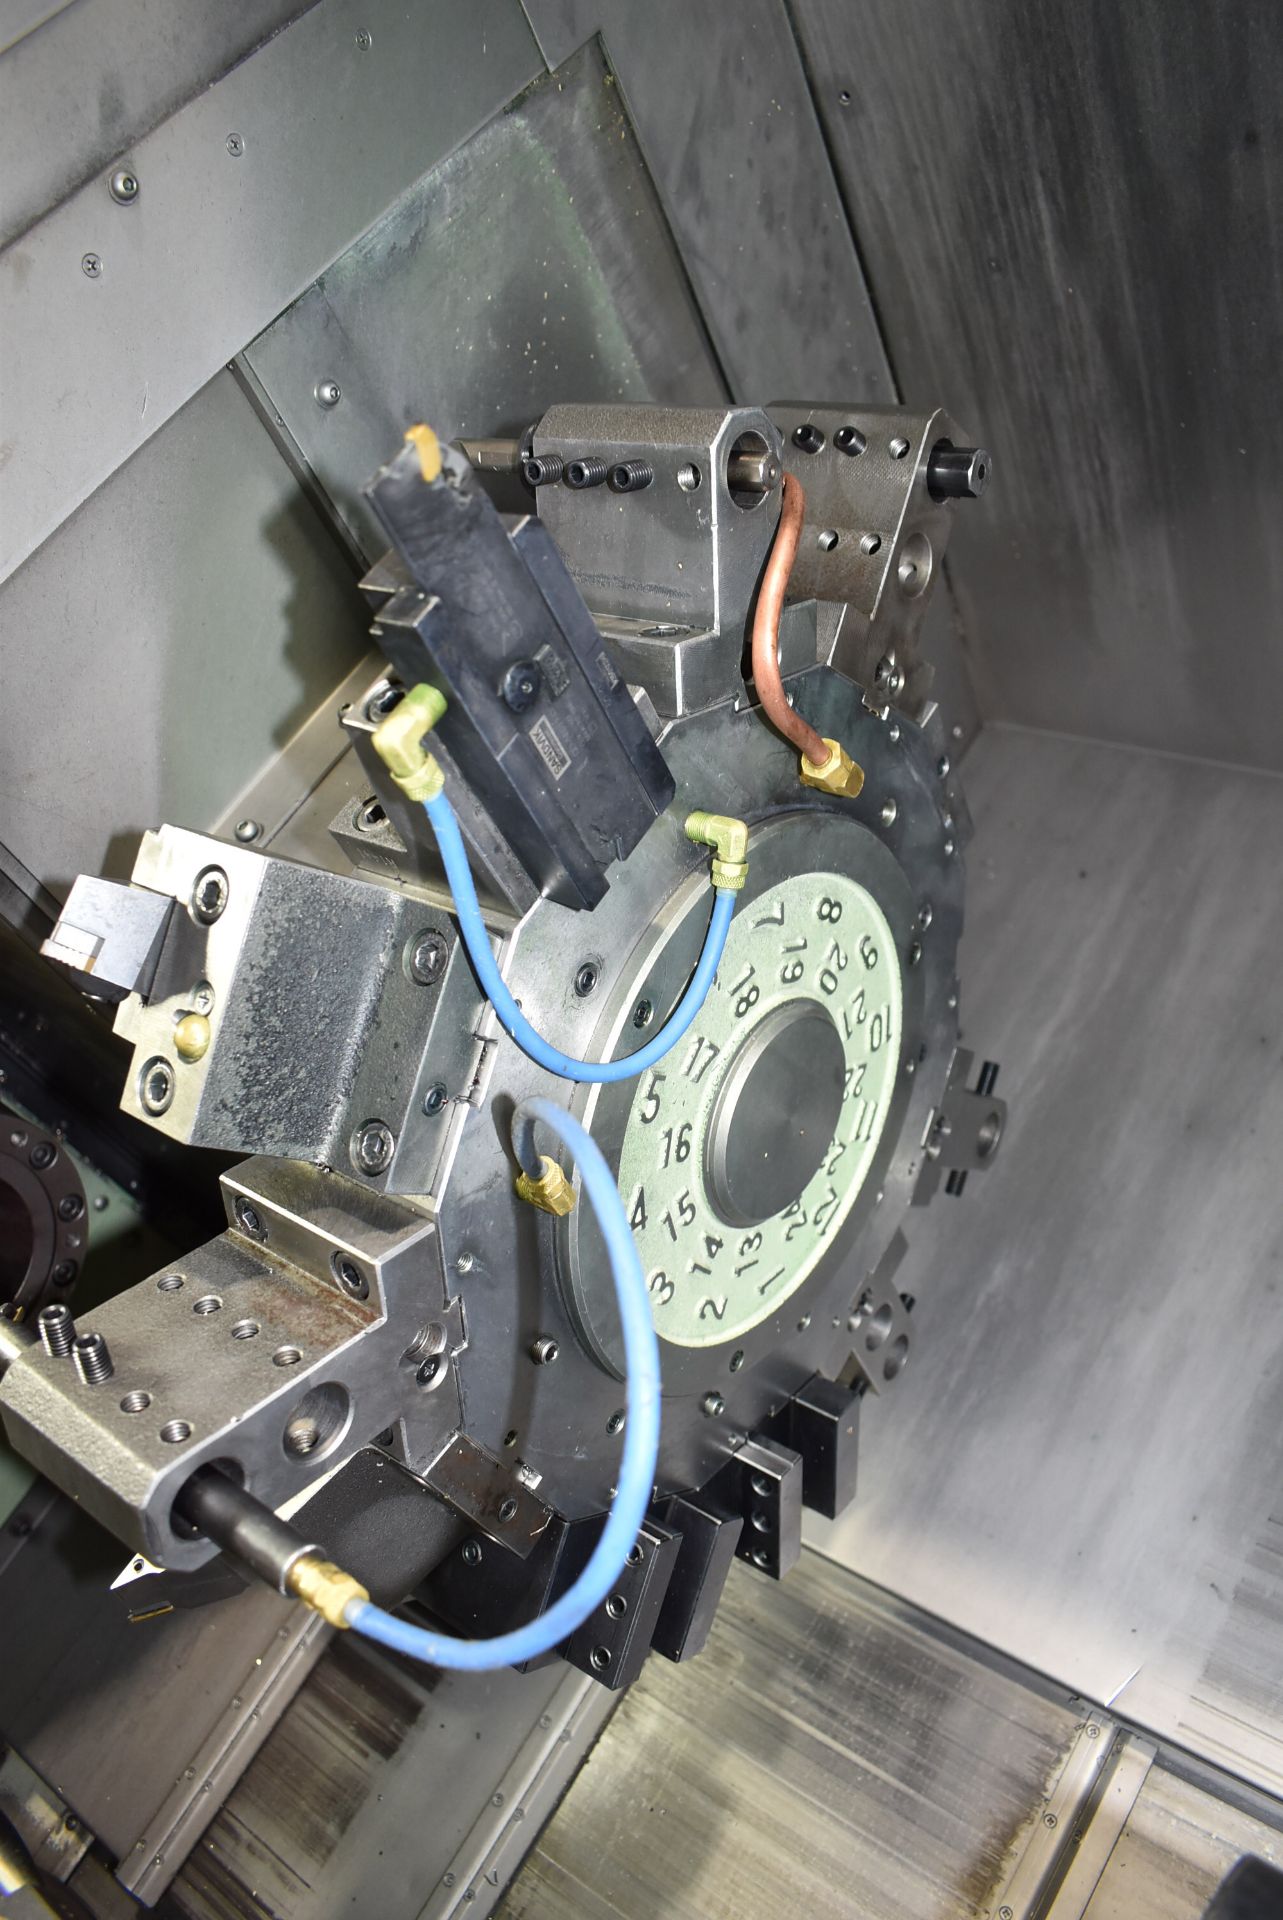 NAKAMURA-TOME WT-250 II MULTI-AXIS OPPOSED SPINDLE AND TWIN TURRET CNC MULTI-TASKING CENTER WITH - Image 3 of 15